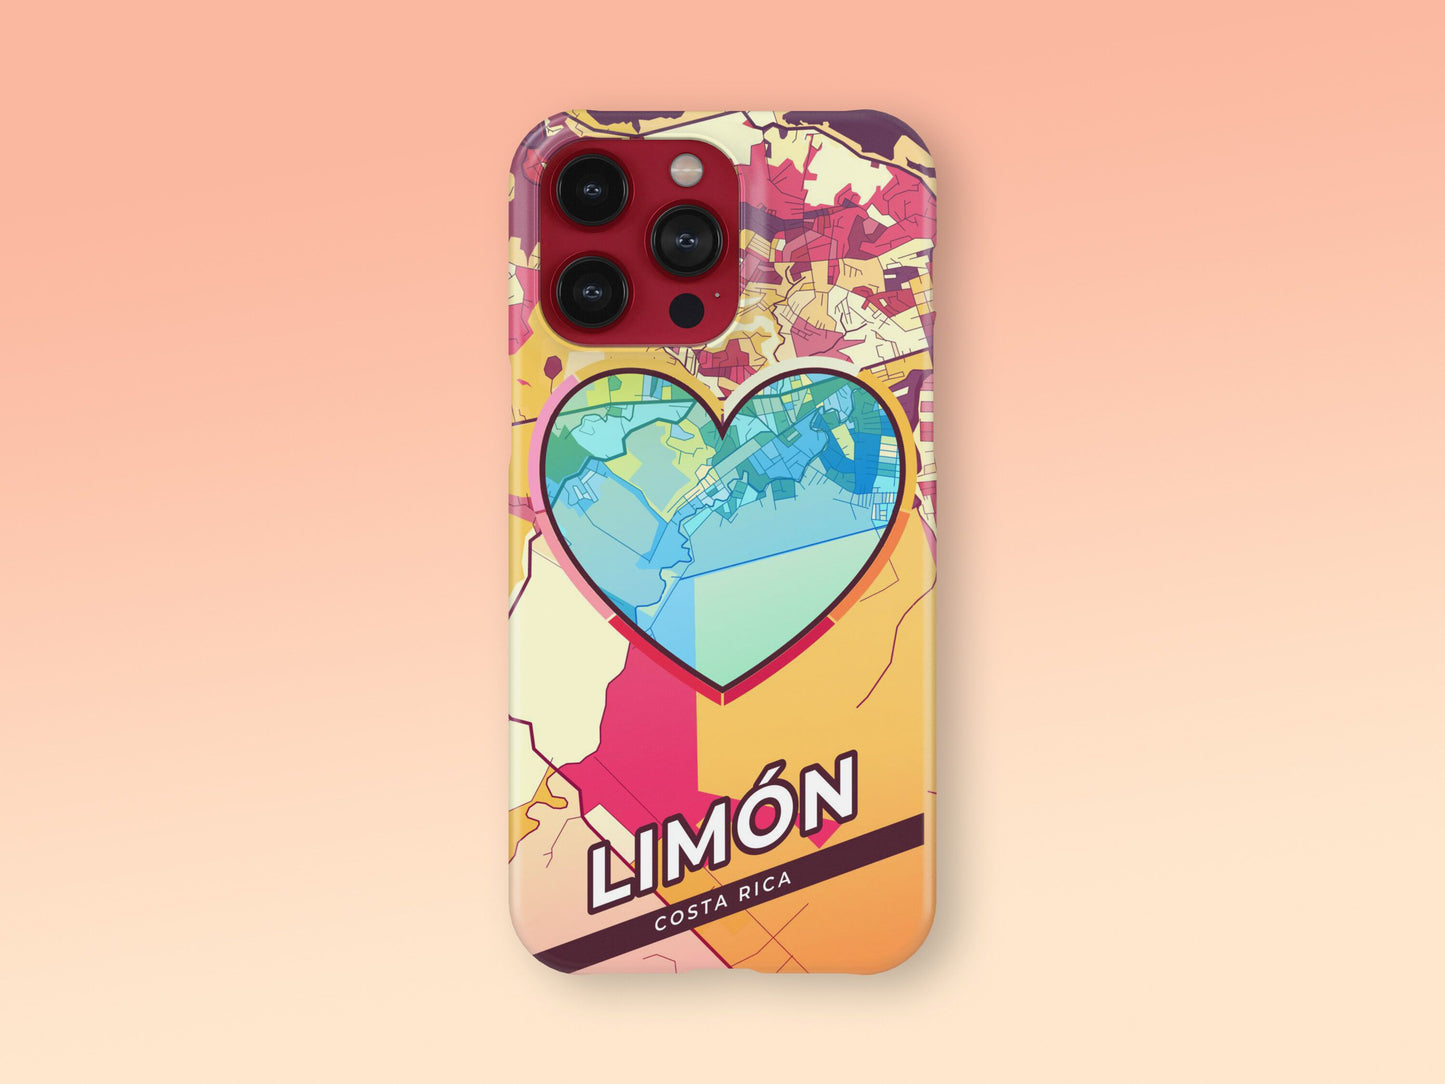 Limón Costa Rica slim phone case with colorful icon. Birthday, wedding or housewarming gift. Couple match cases. 2